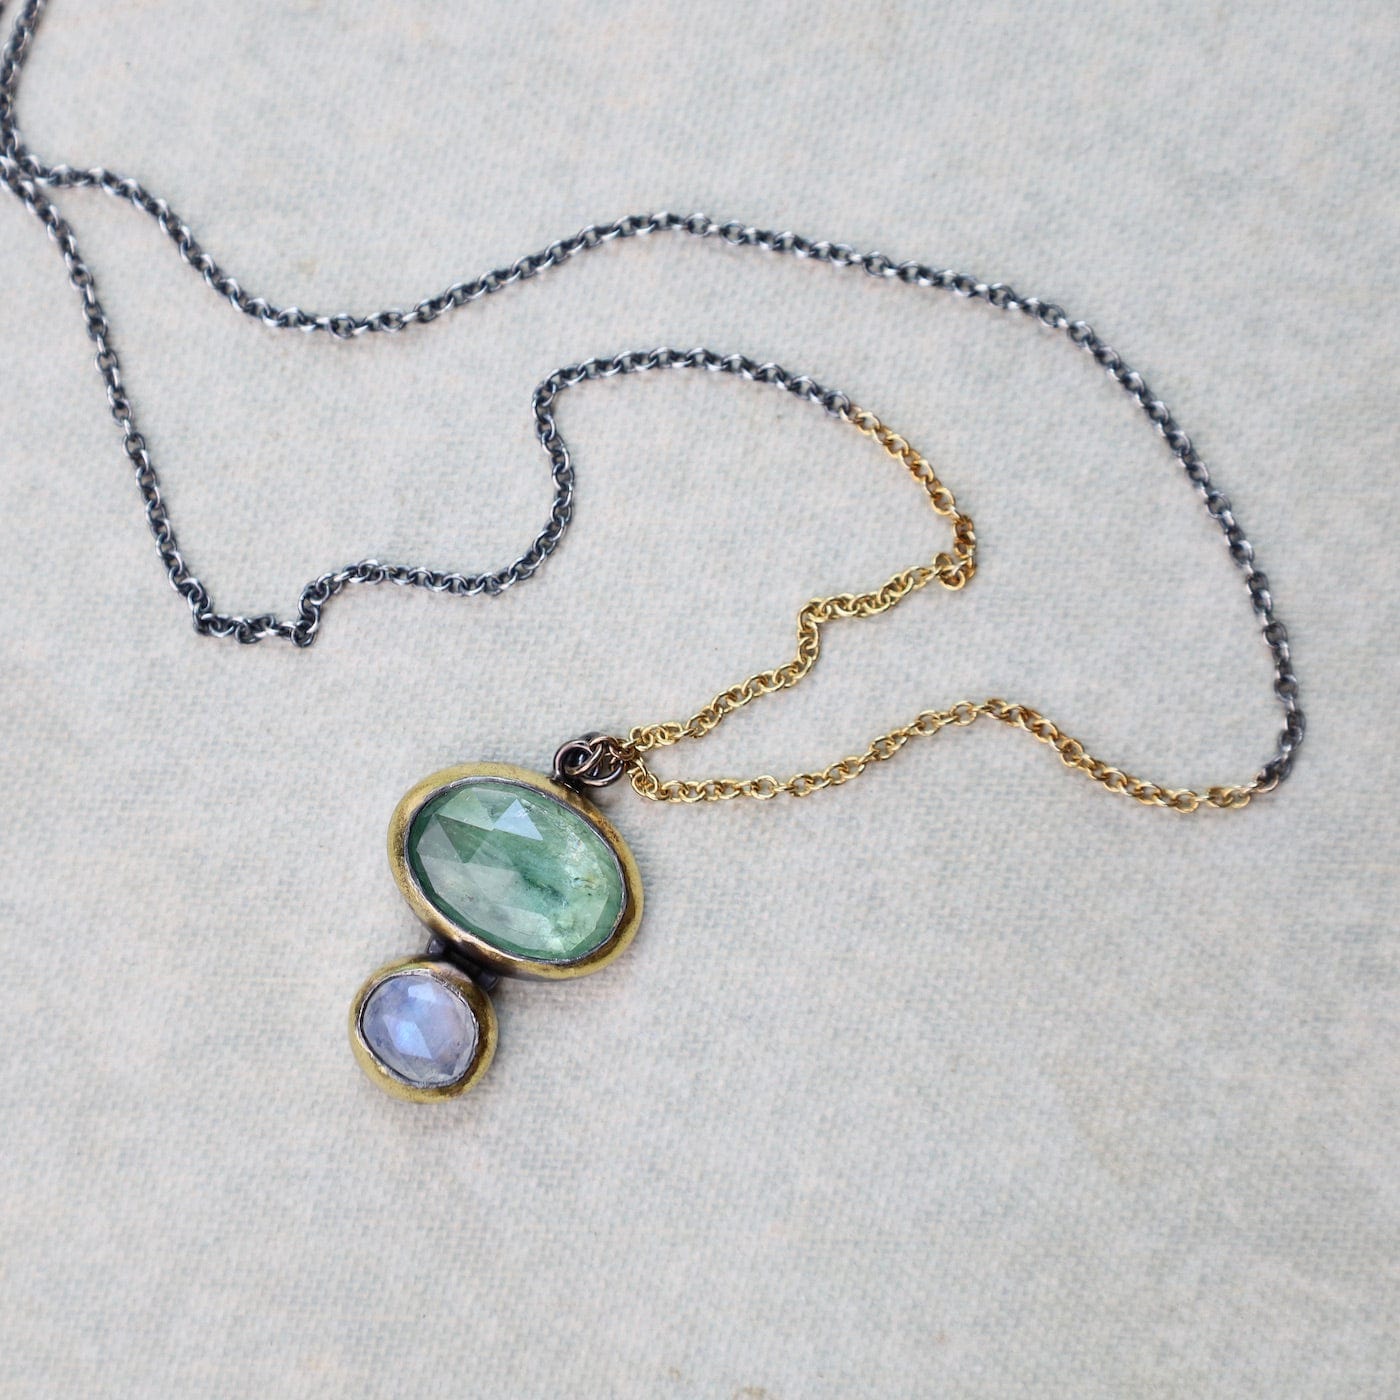 NKL Double Rim Necklace with Split Chain - Green Kyanite & Moonstone